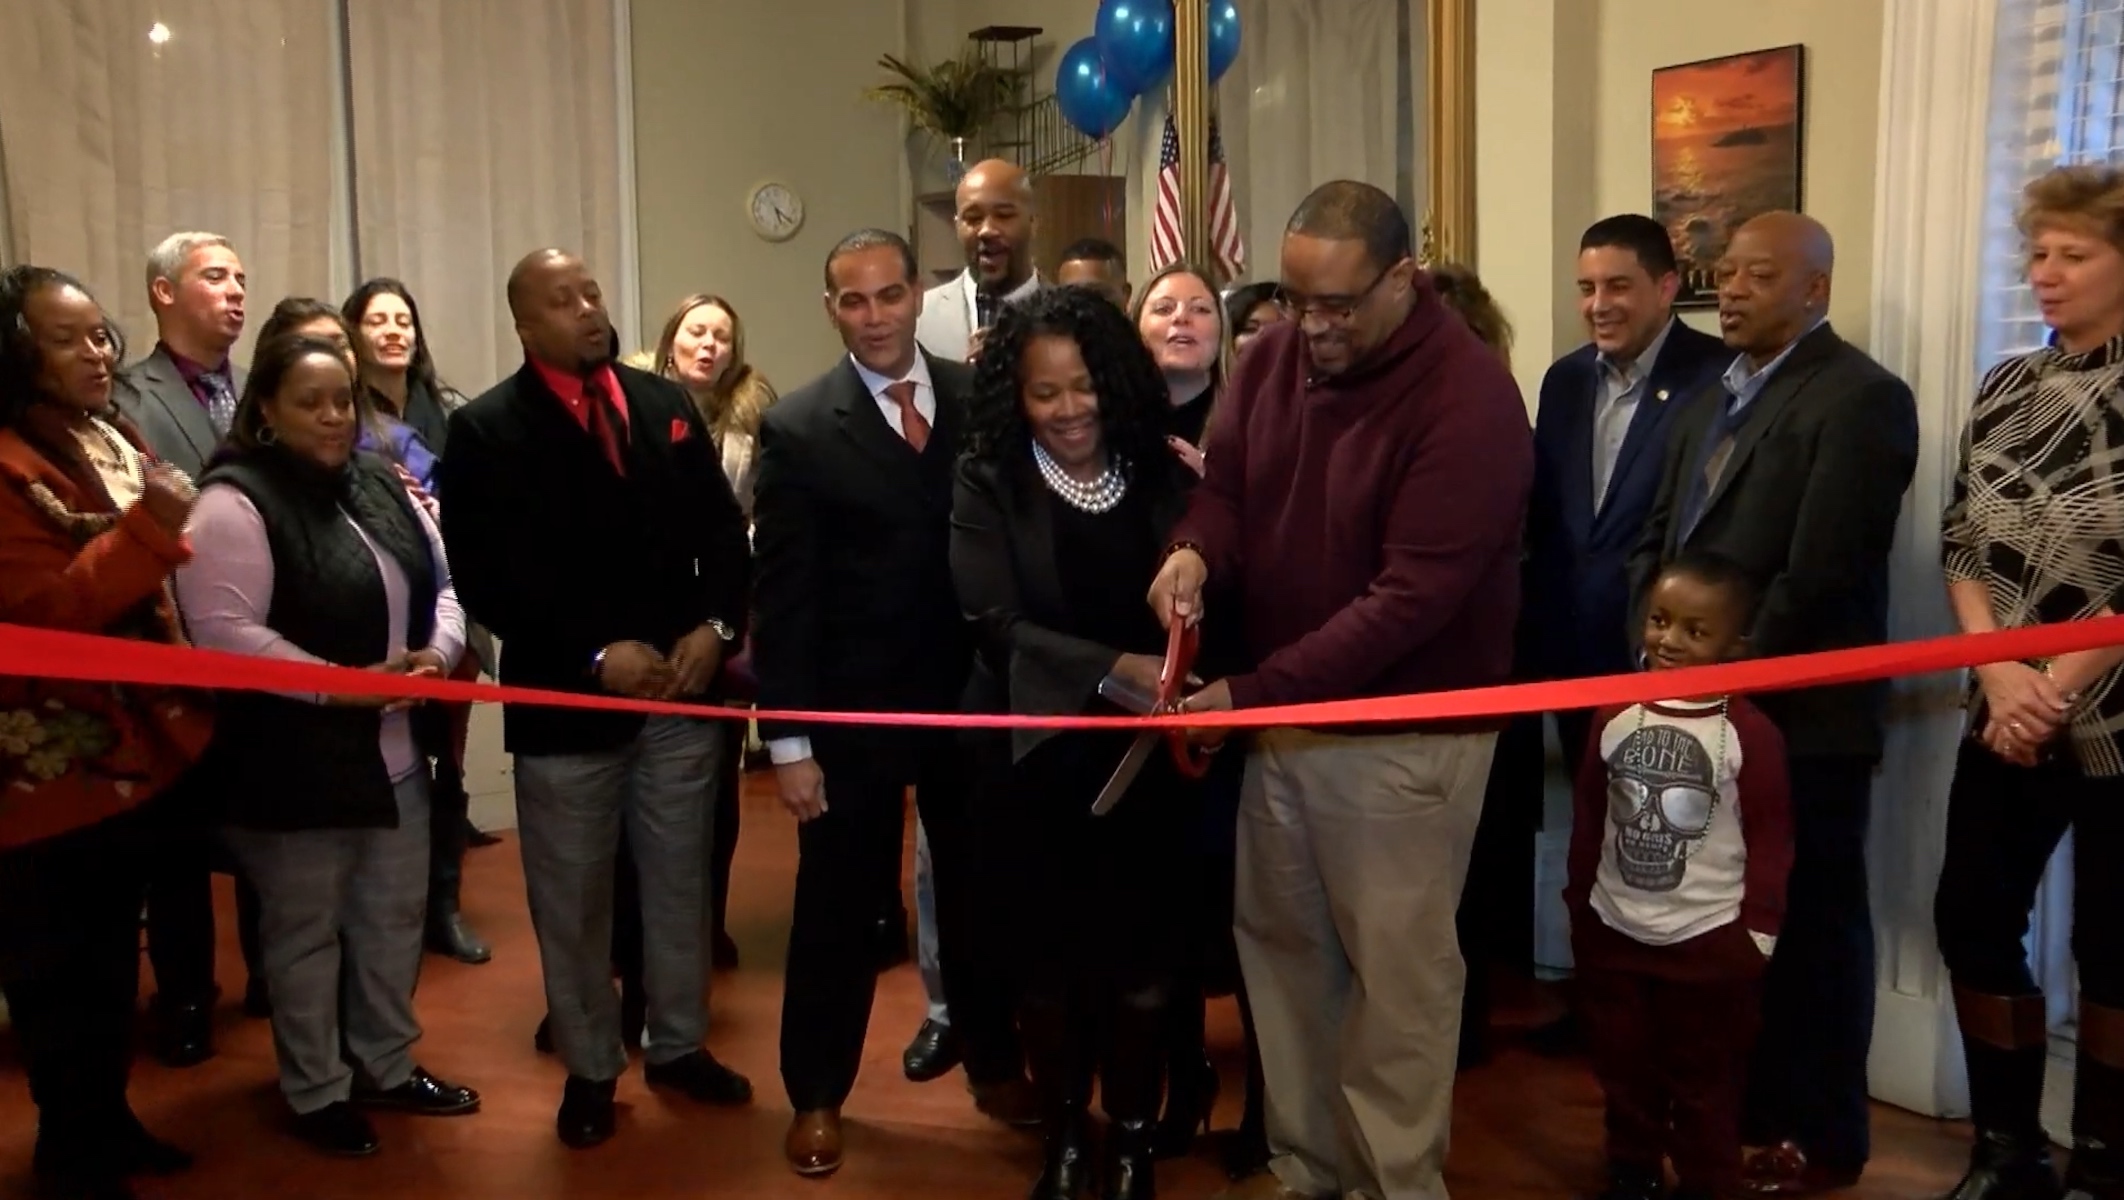 The City of Peekskill Youth Bureau and Peekskill City School District celebrated a new joint venture that addresses out-of-school school suspension.